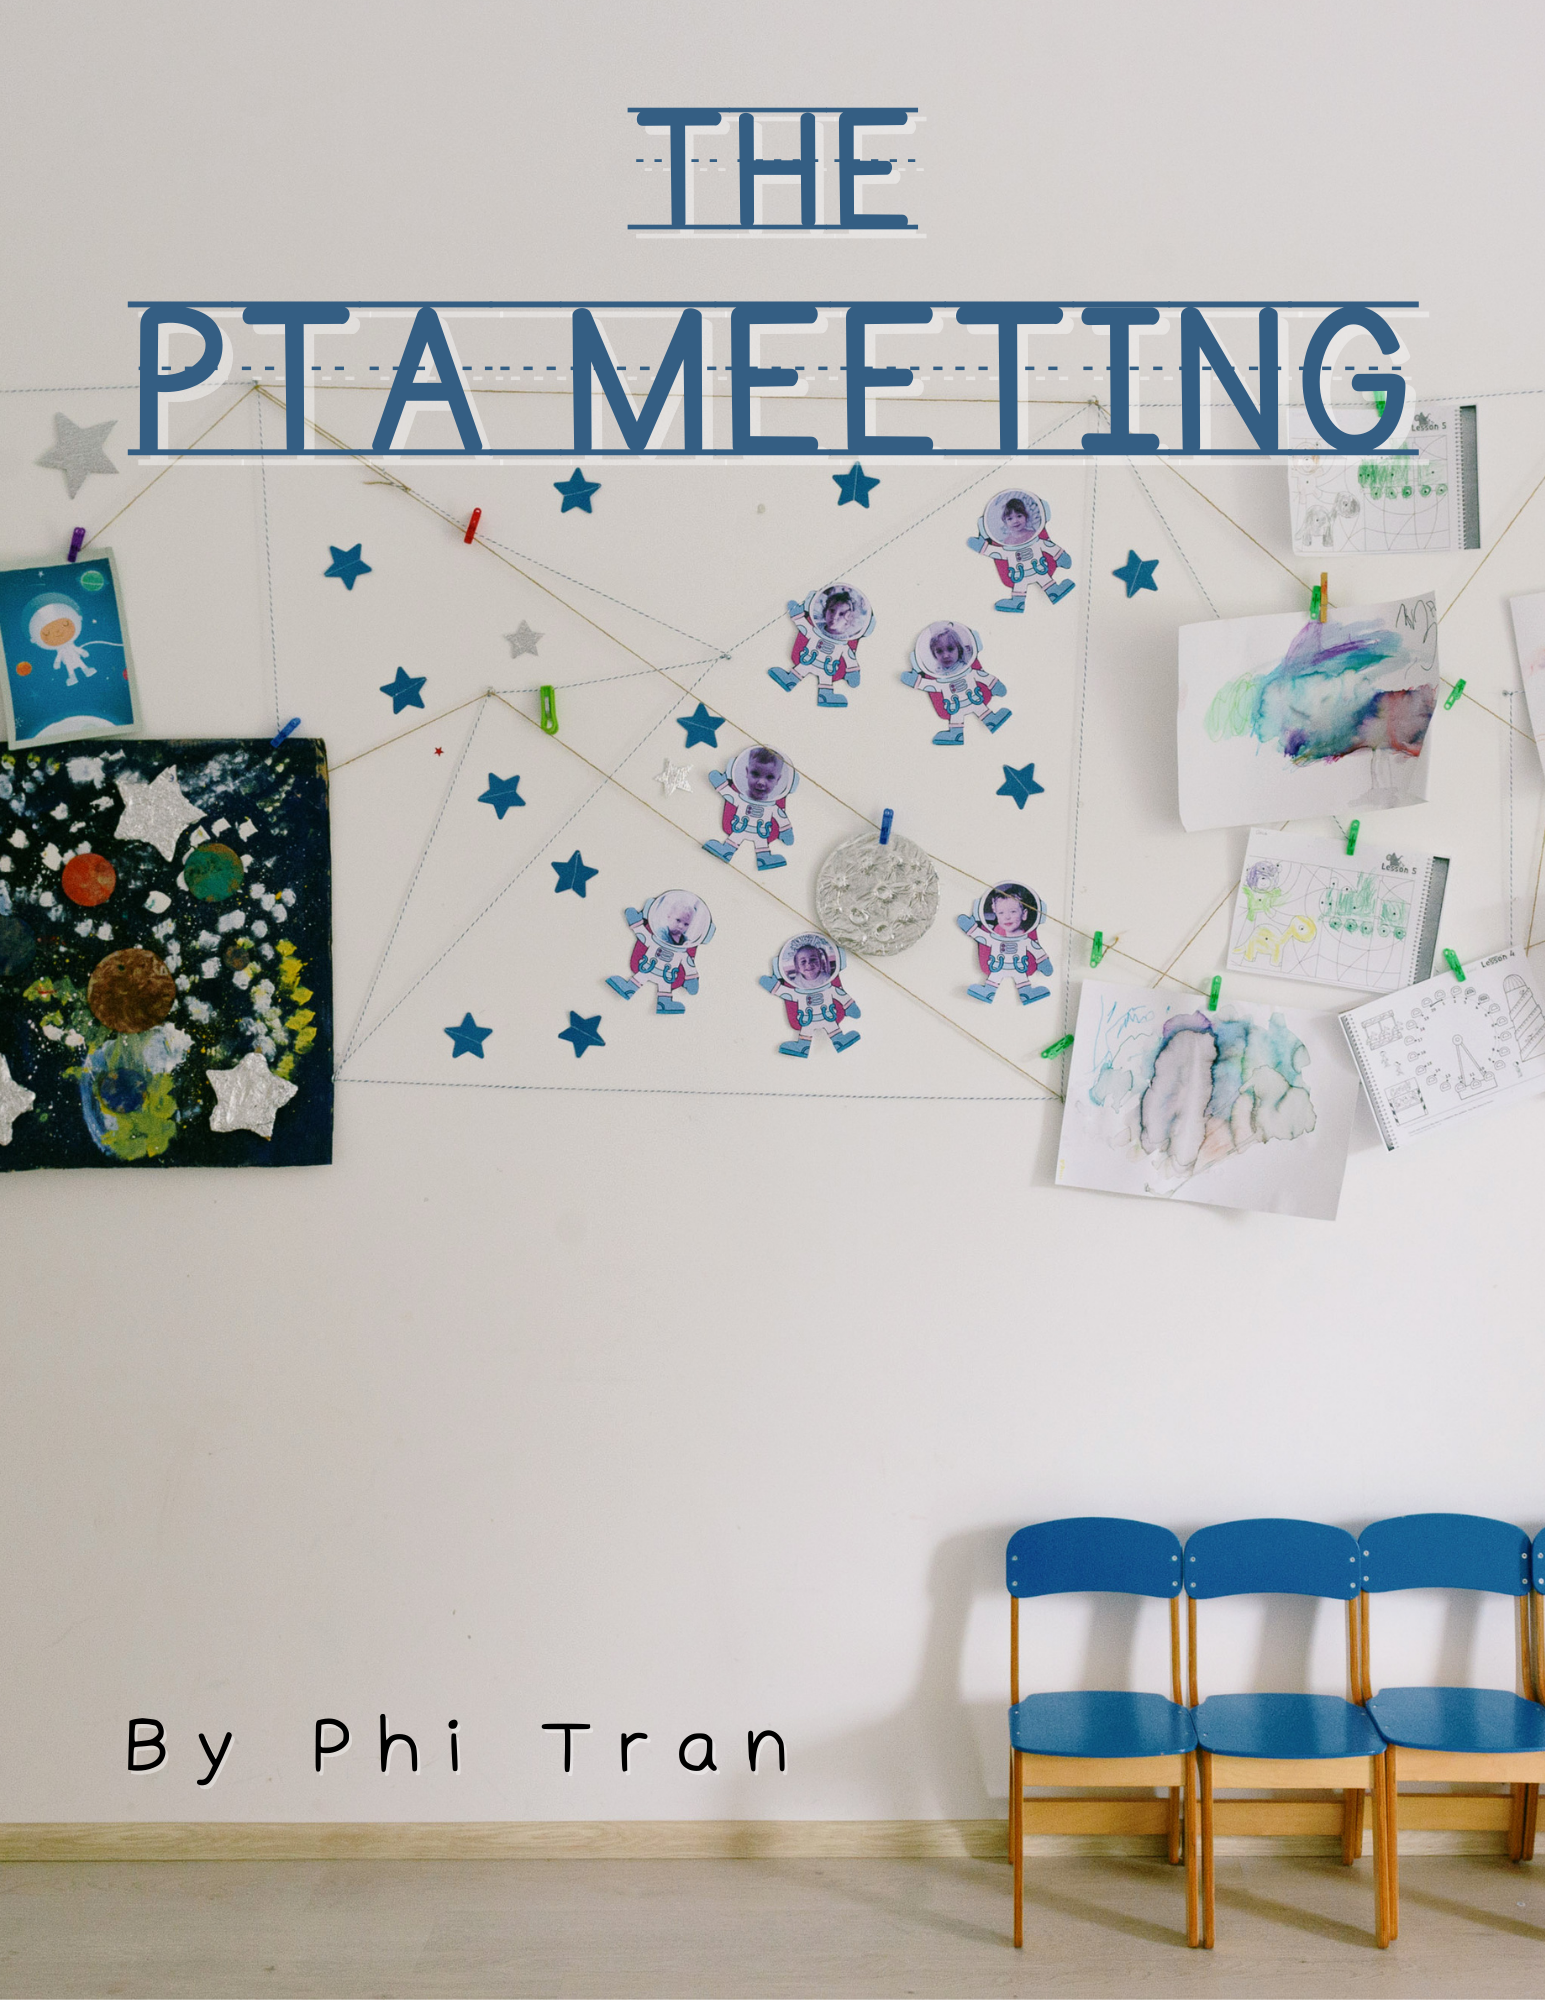 The PTA Meeting by Phi Tran on a school classroom background